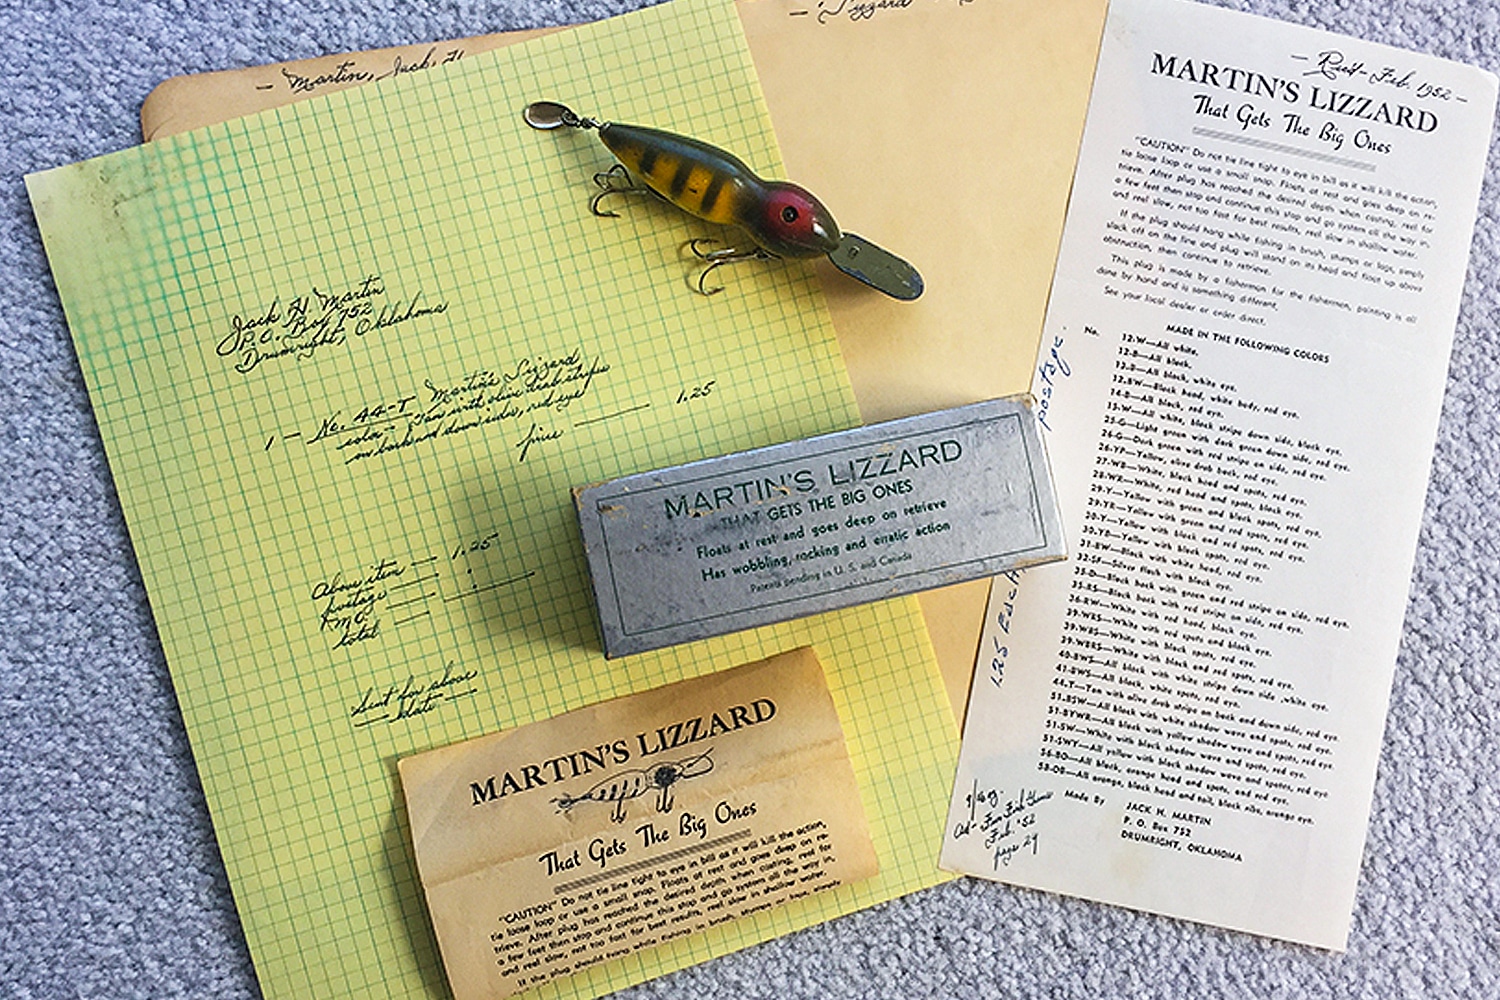 How much can I get for this vintage Martin lure? : r/tacklebox